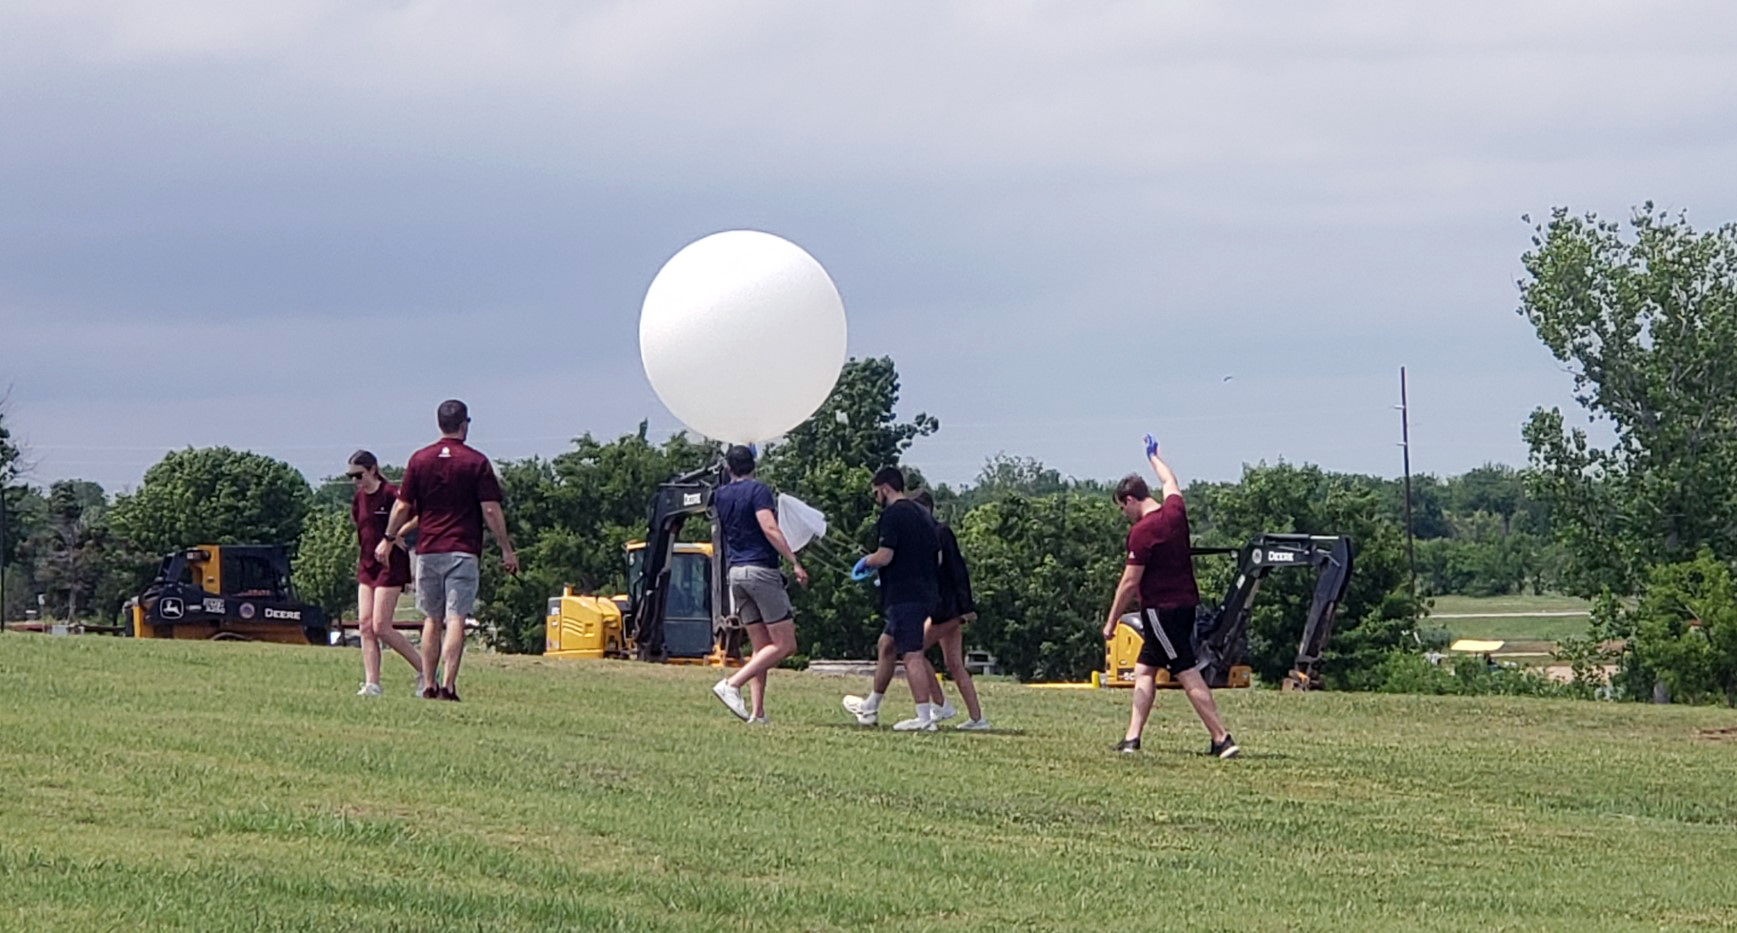 Texas A&amp;M students launch a weather balloon in Lawton, Oklahoma